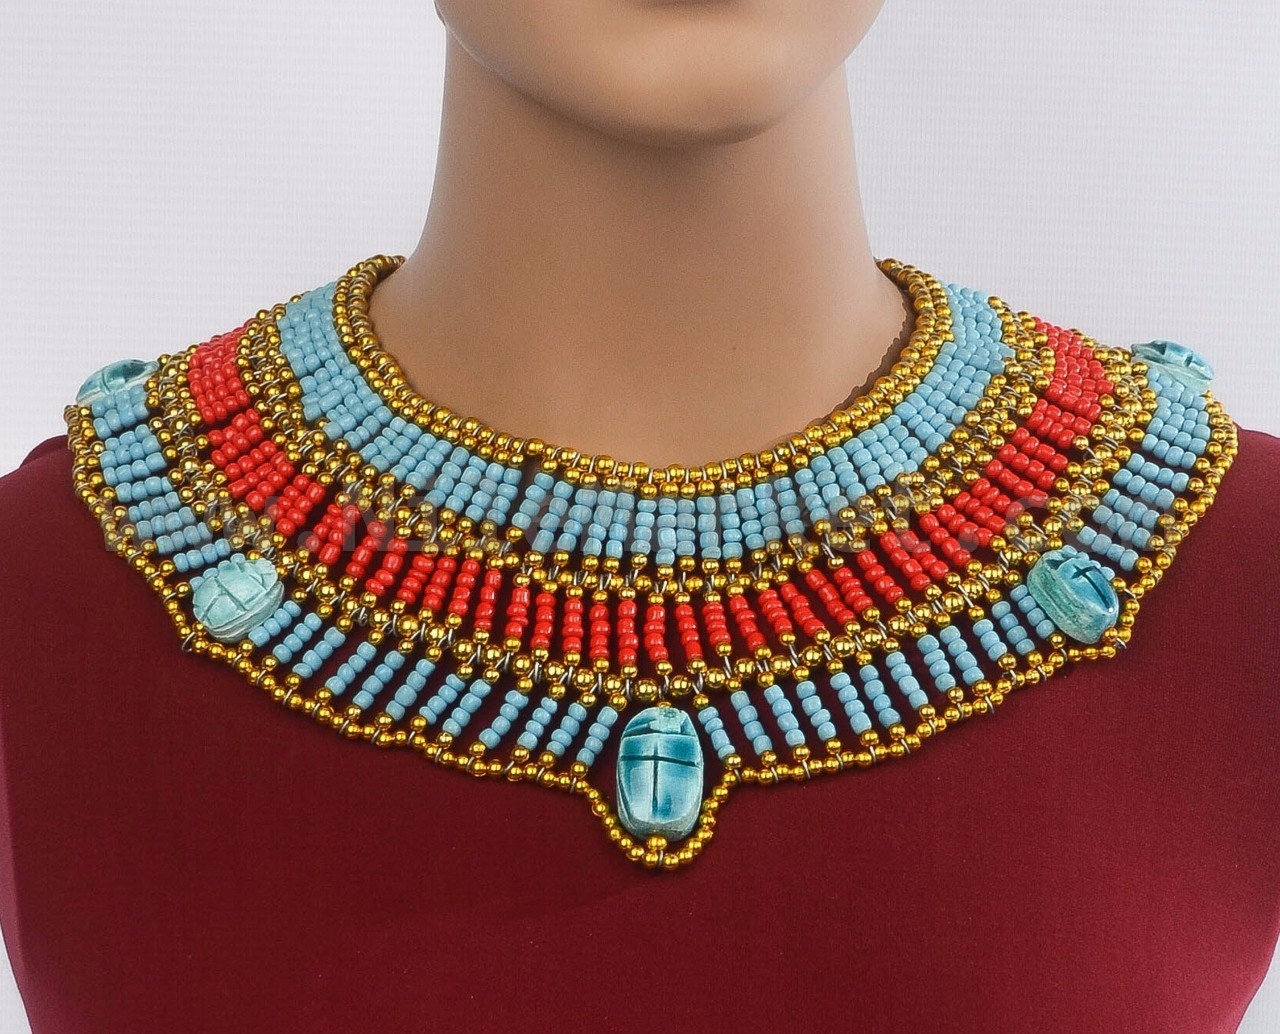 Egyptian Beaded Cleopatra 7 Scarabs Necklace Collar